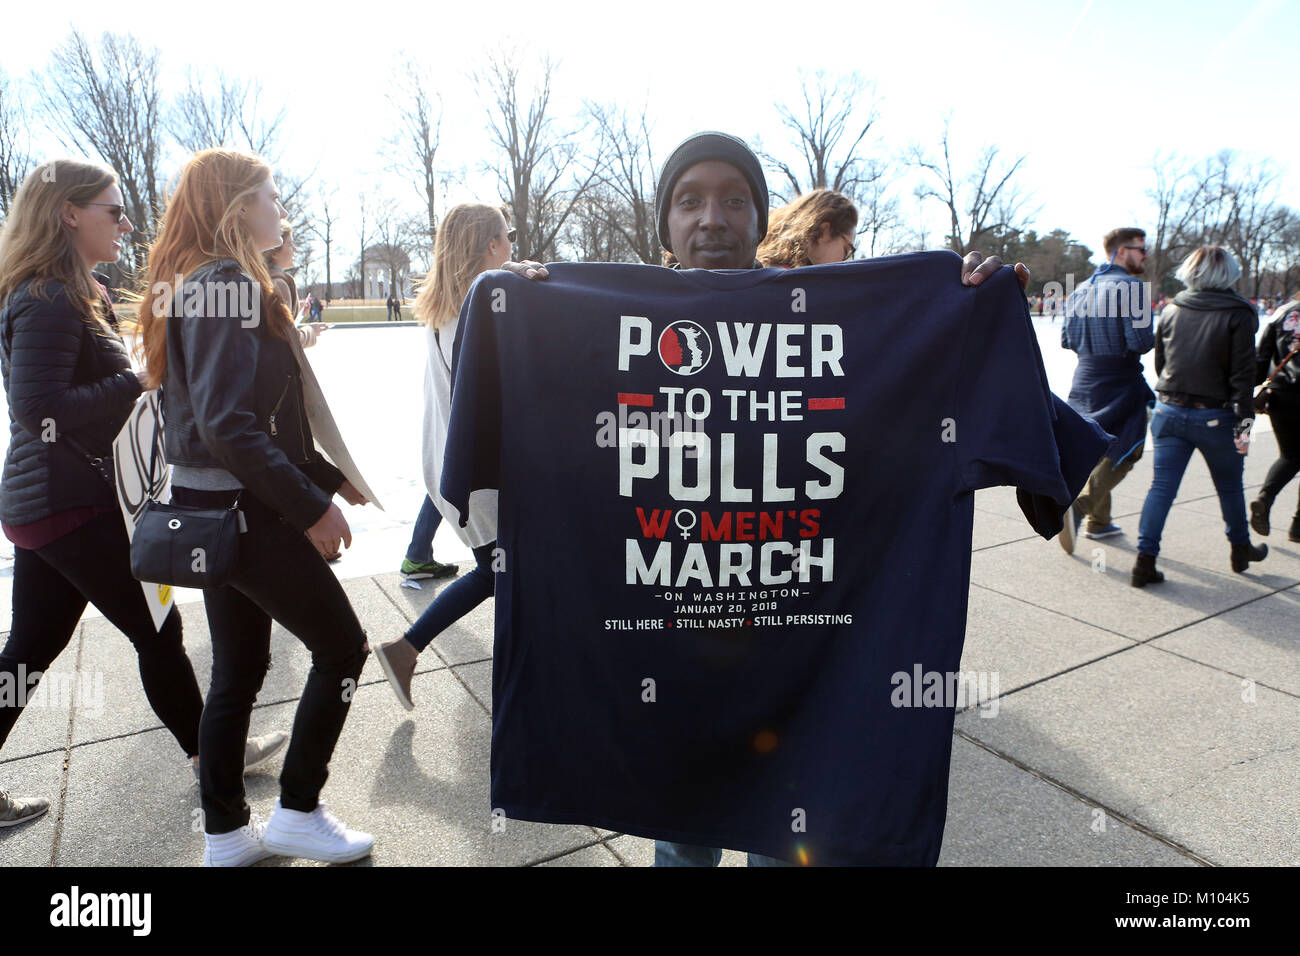 Washington Dc, DC, USA. 20th Jan, 2018. A vendor holds a T-Shirt that reads 'Power to the Polls Women March on Washington January 20, 2018. Still Here Still Nasty Still Persisting.' Thousands of women and their supporters march during the 2018 Women's March on Washington. Credit: Krista Kennell/ZUMA Wire/Alamy Live News Stock Photo